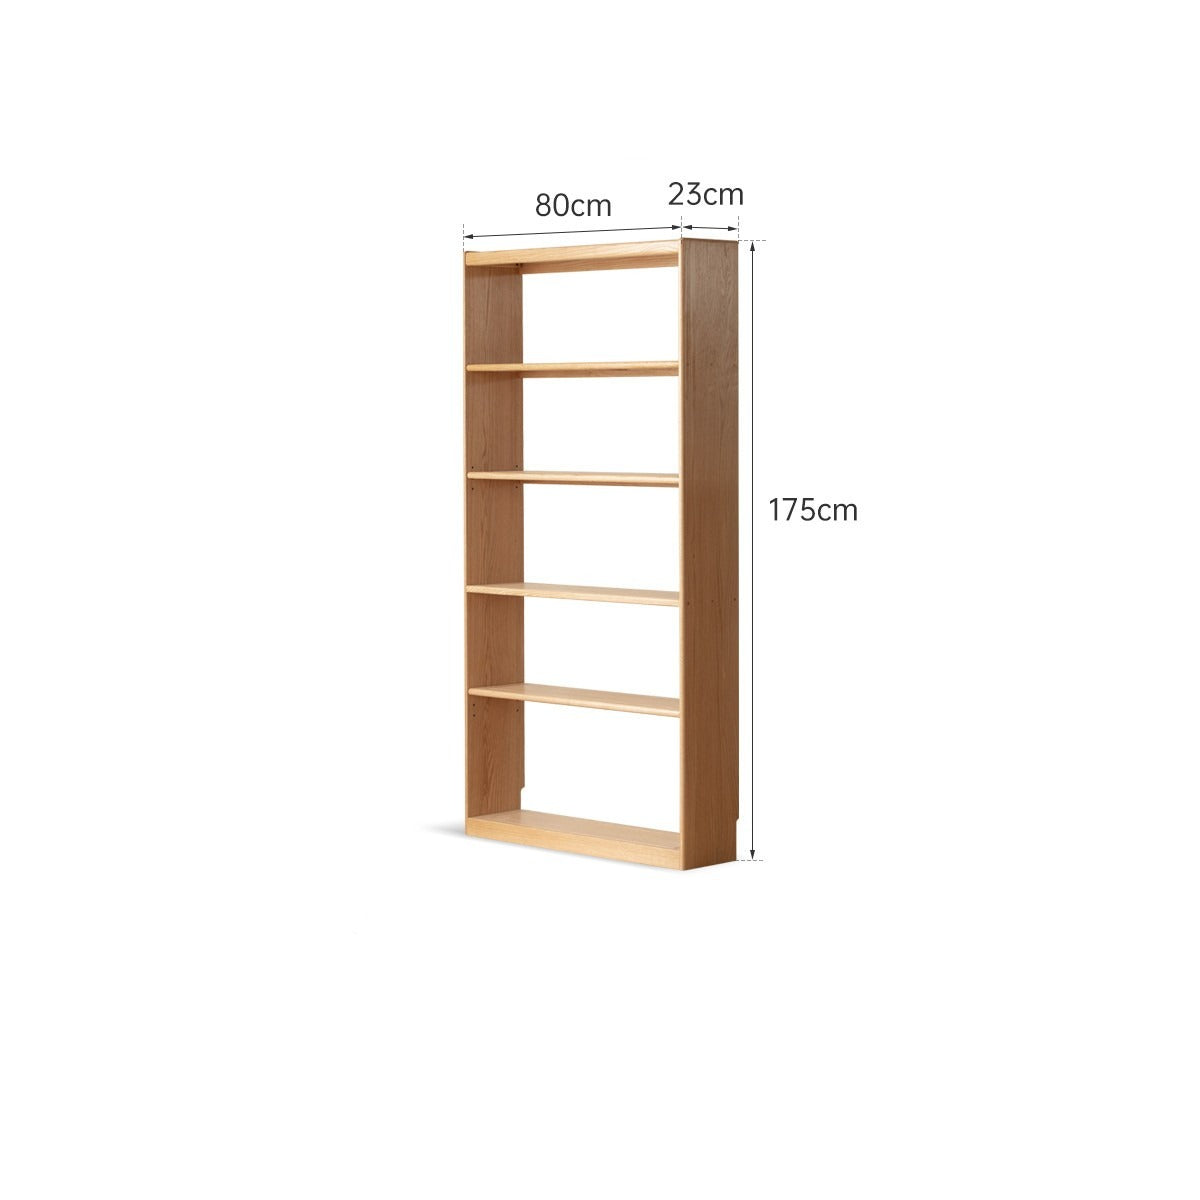 Oak Solid Wood Bookcase can be combined with a desk,ultra narrow bookshelves